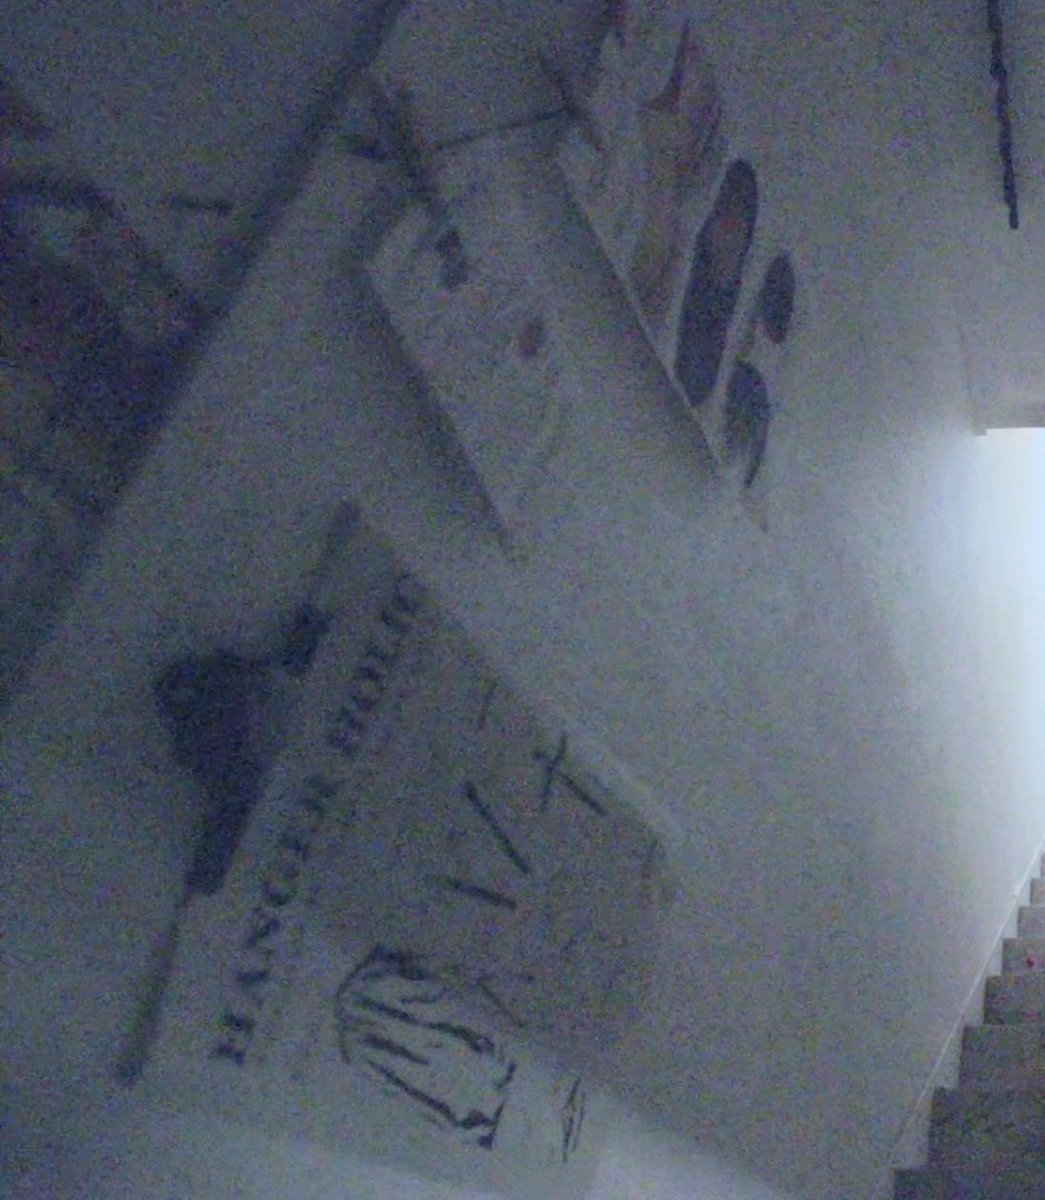 The last strange thing I found was this stack of papers pinned to the wall, titled Hanger Holic. It mysteriously has an image of a cross on it, but I'll let yall make the connection to Go Won from that since it seems a little tinfoil hatty